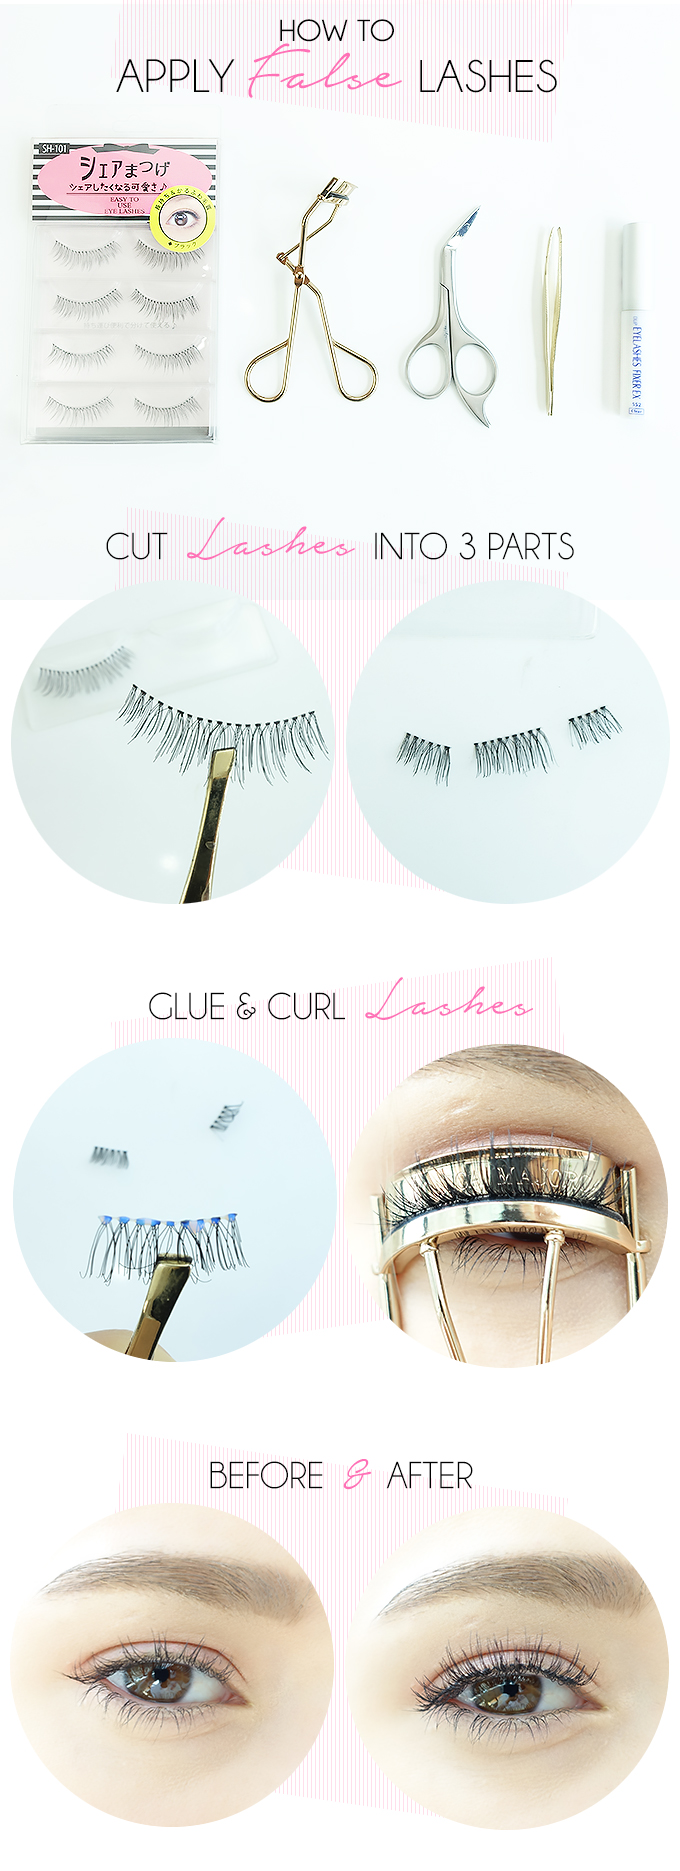 HOW TO APPLY FALSE LASHES